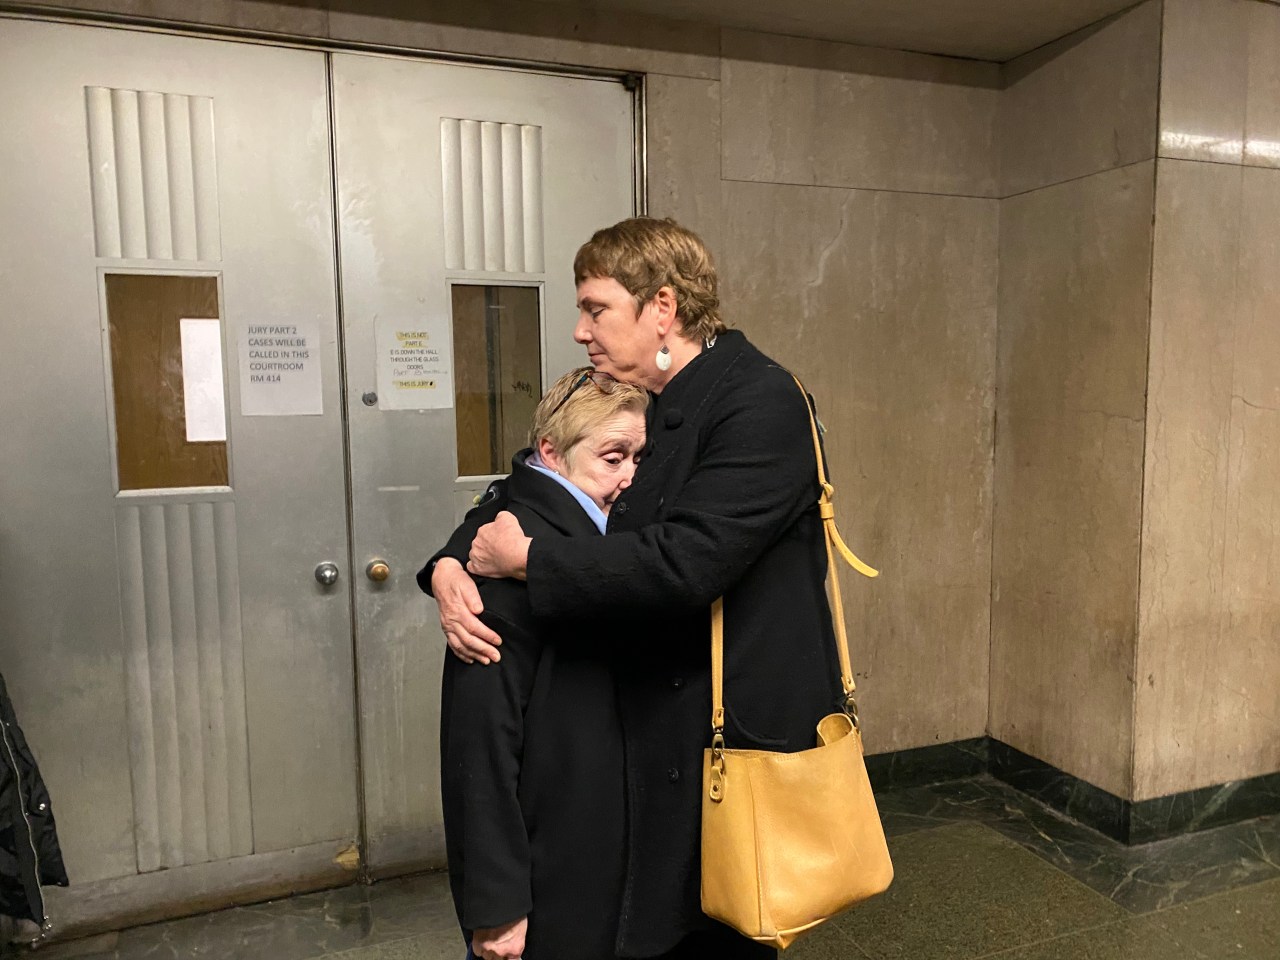 Christopher Brimer (left) is embraced by a friend outside the courtroom after the sentencing at Manhattan Criminal Court on March 7. Photo: Kevin Duggan